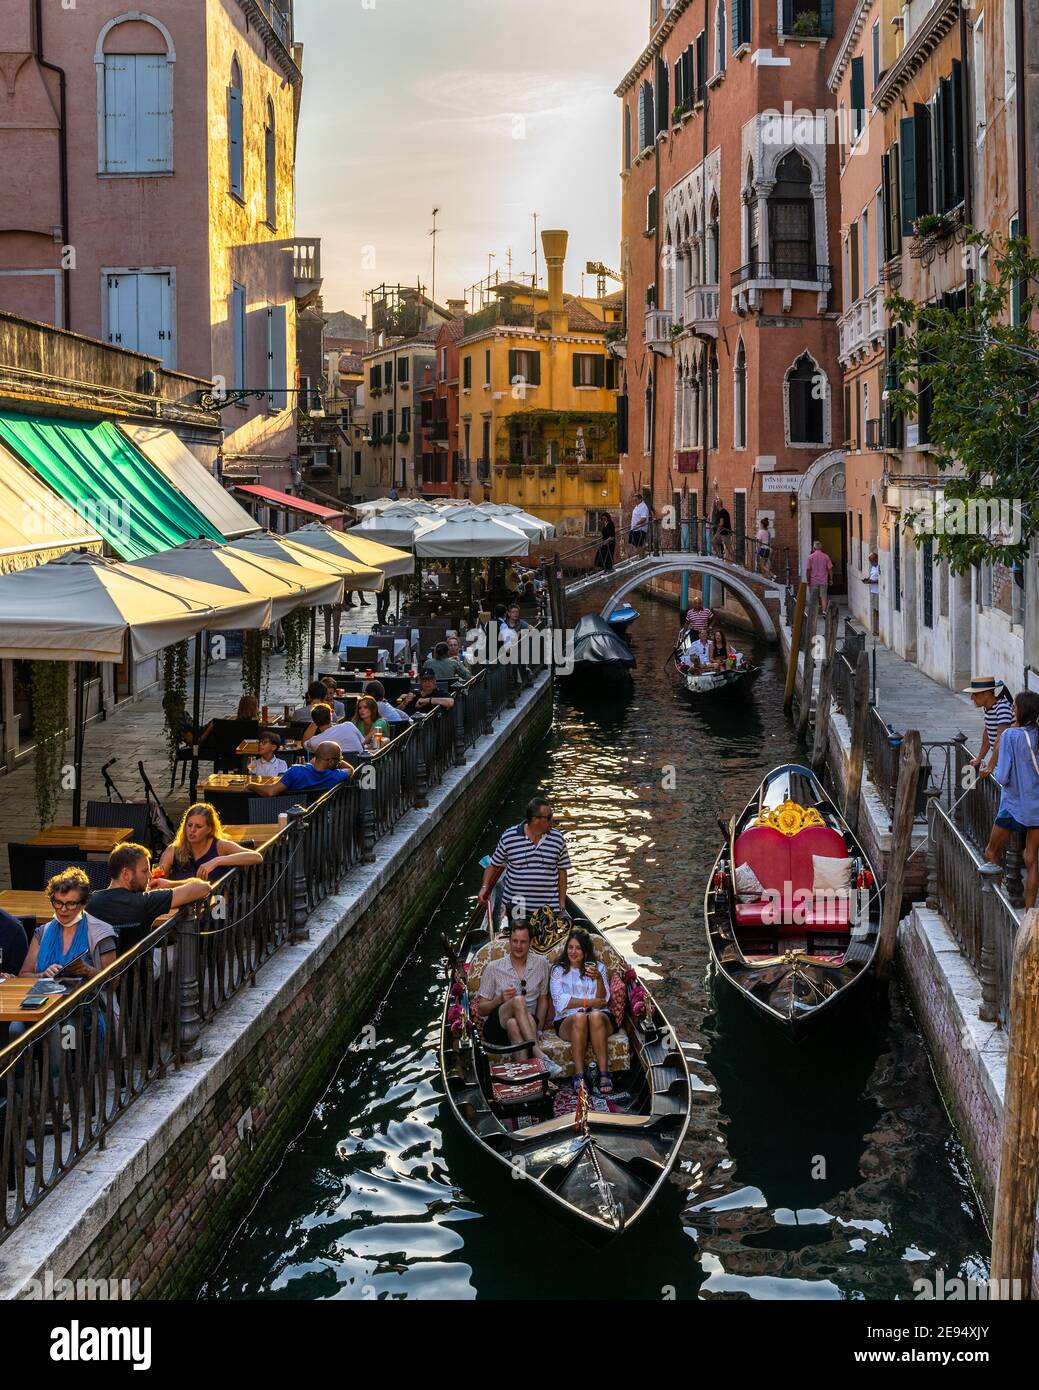 Venice, Italy, Sept. 11, 2020 – Picturesque Venice canal with gondolas and tourists on the right enjoying the sunset in a cocktail bar Stock Photo